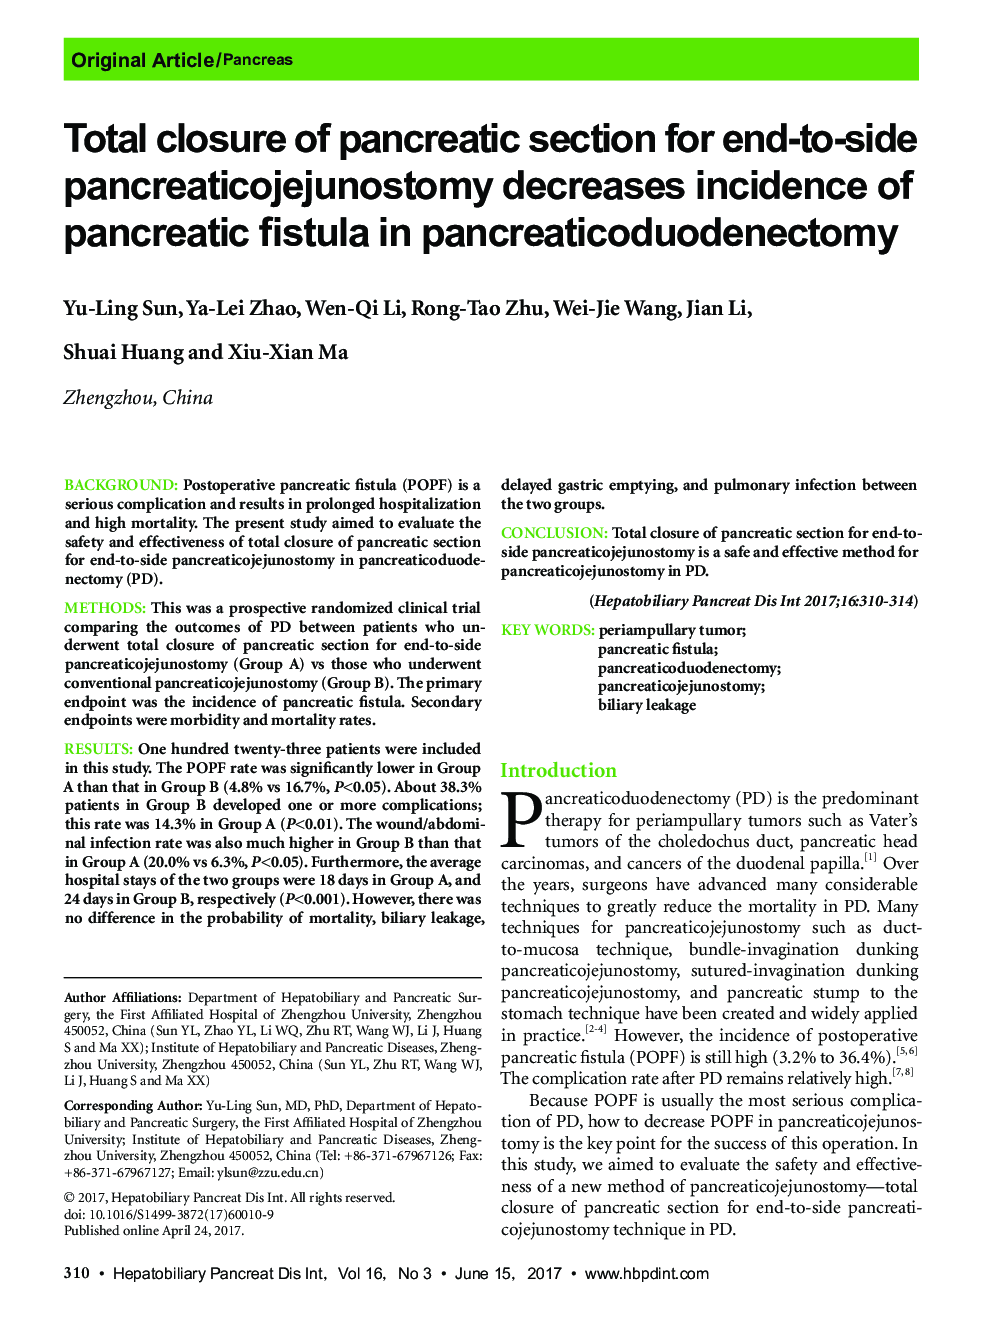 Total closure of pancreatic section for end-to-side pancreaticojejunostomy decreases incidence of pancreatic fistula in pancreaticoduodenectomy